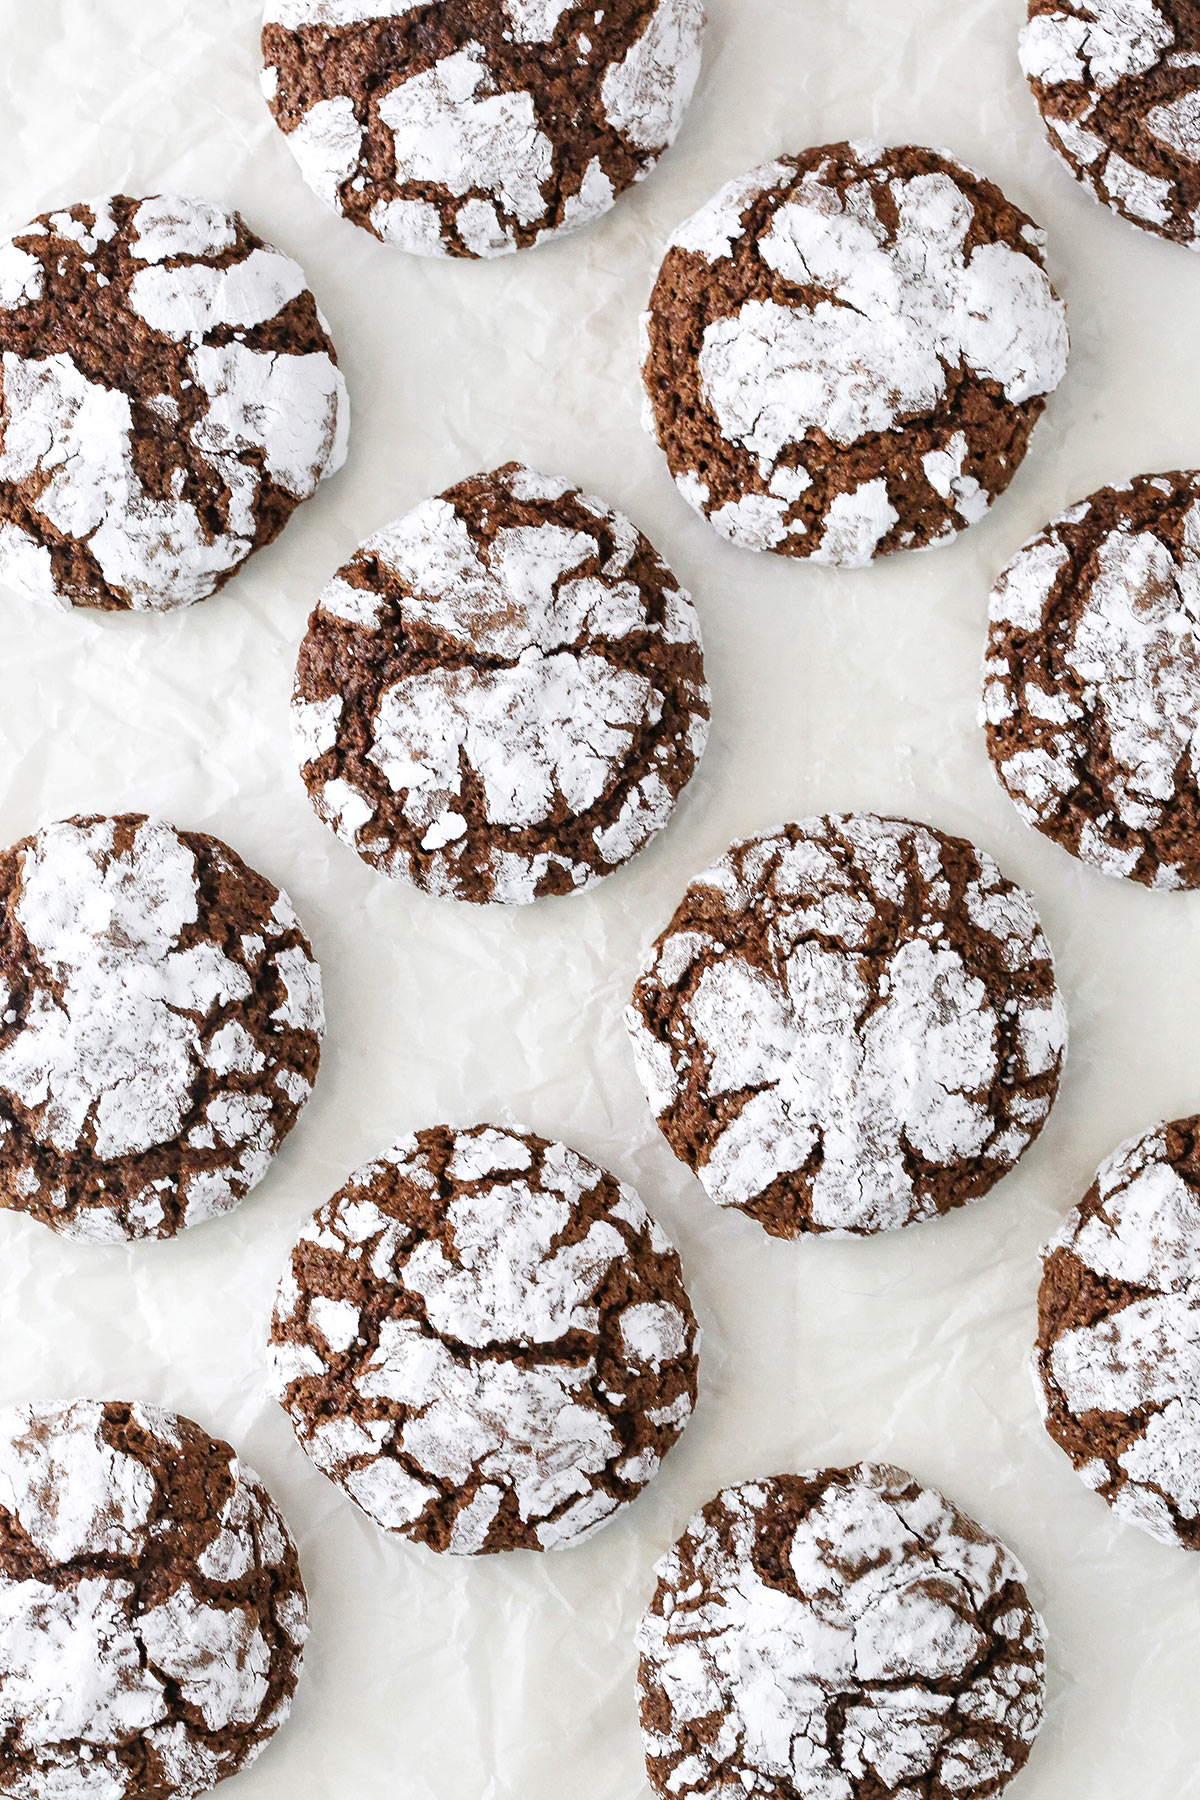 Chocolate crinkle cookies on a white surface.